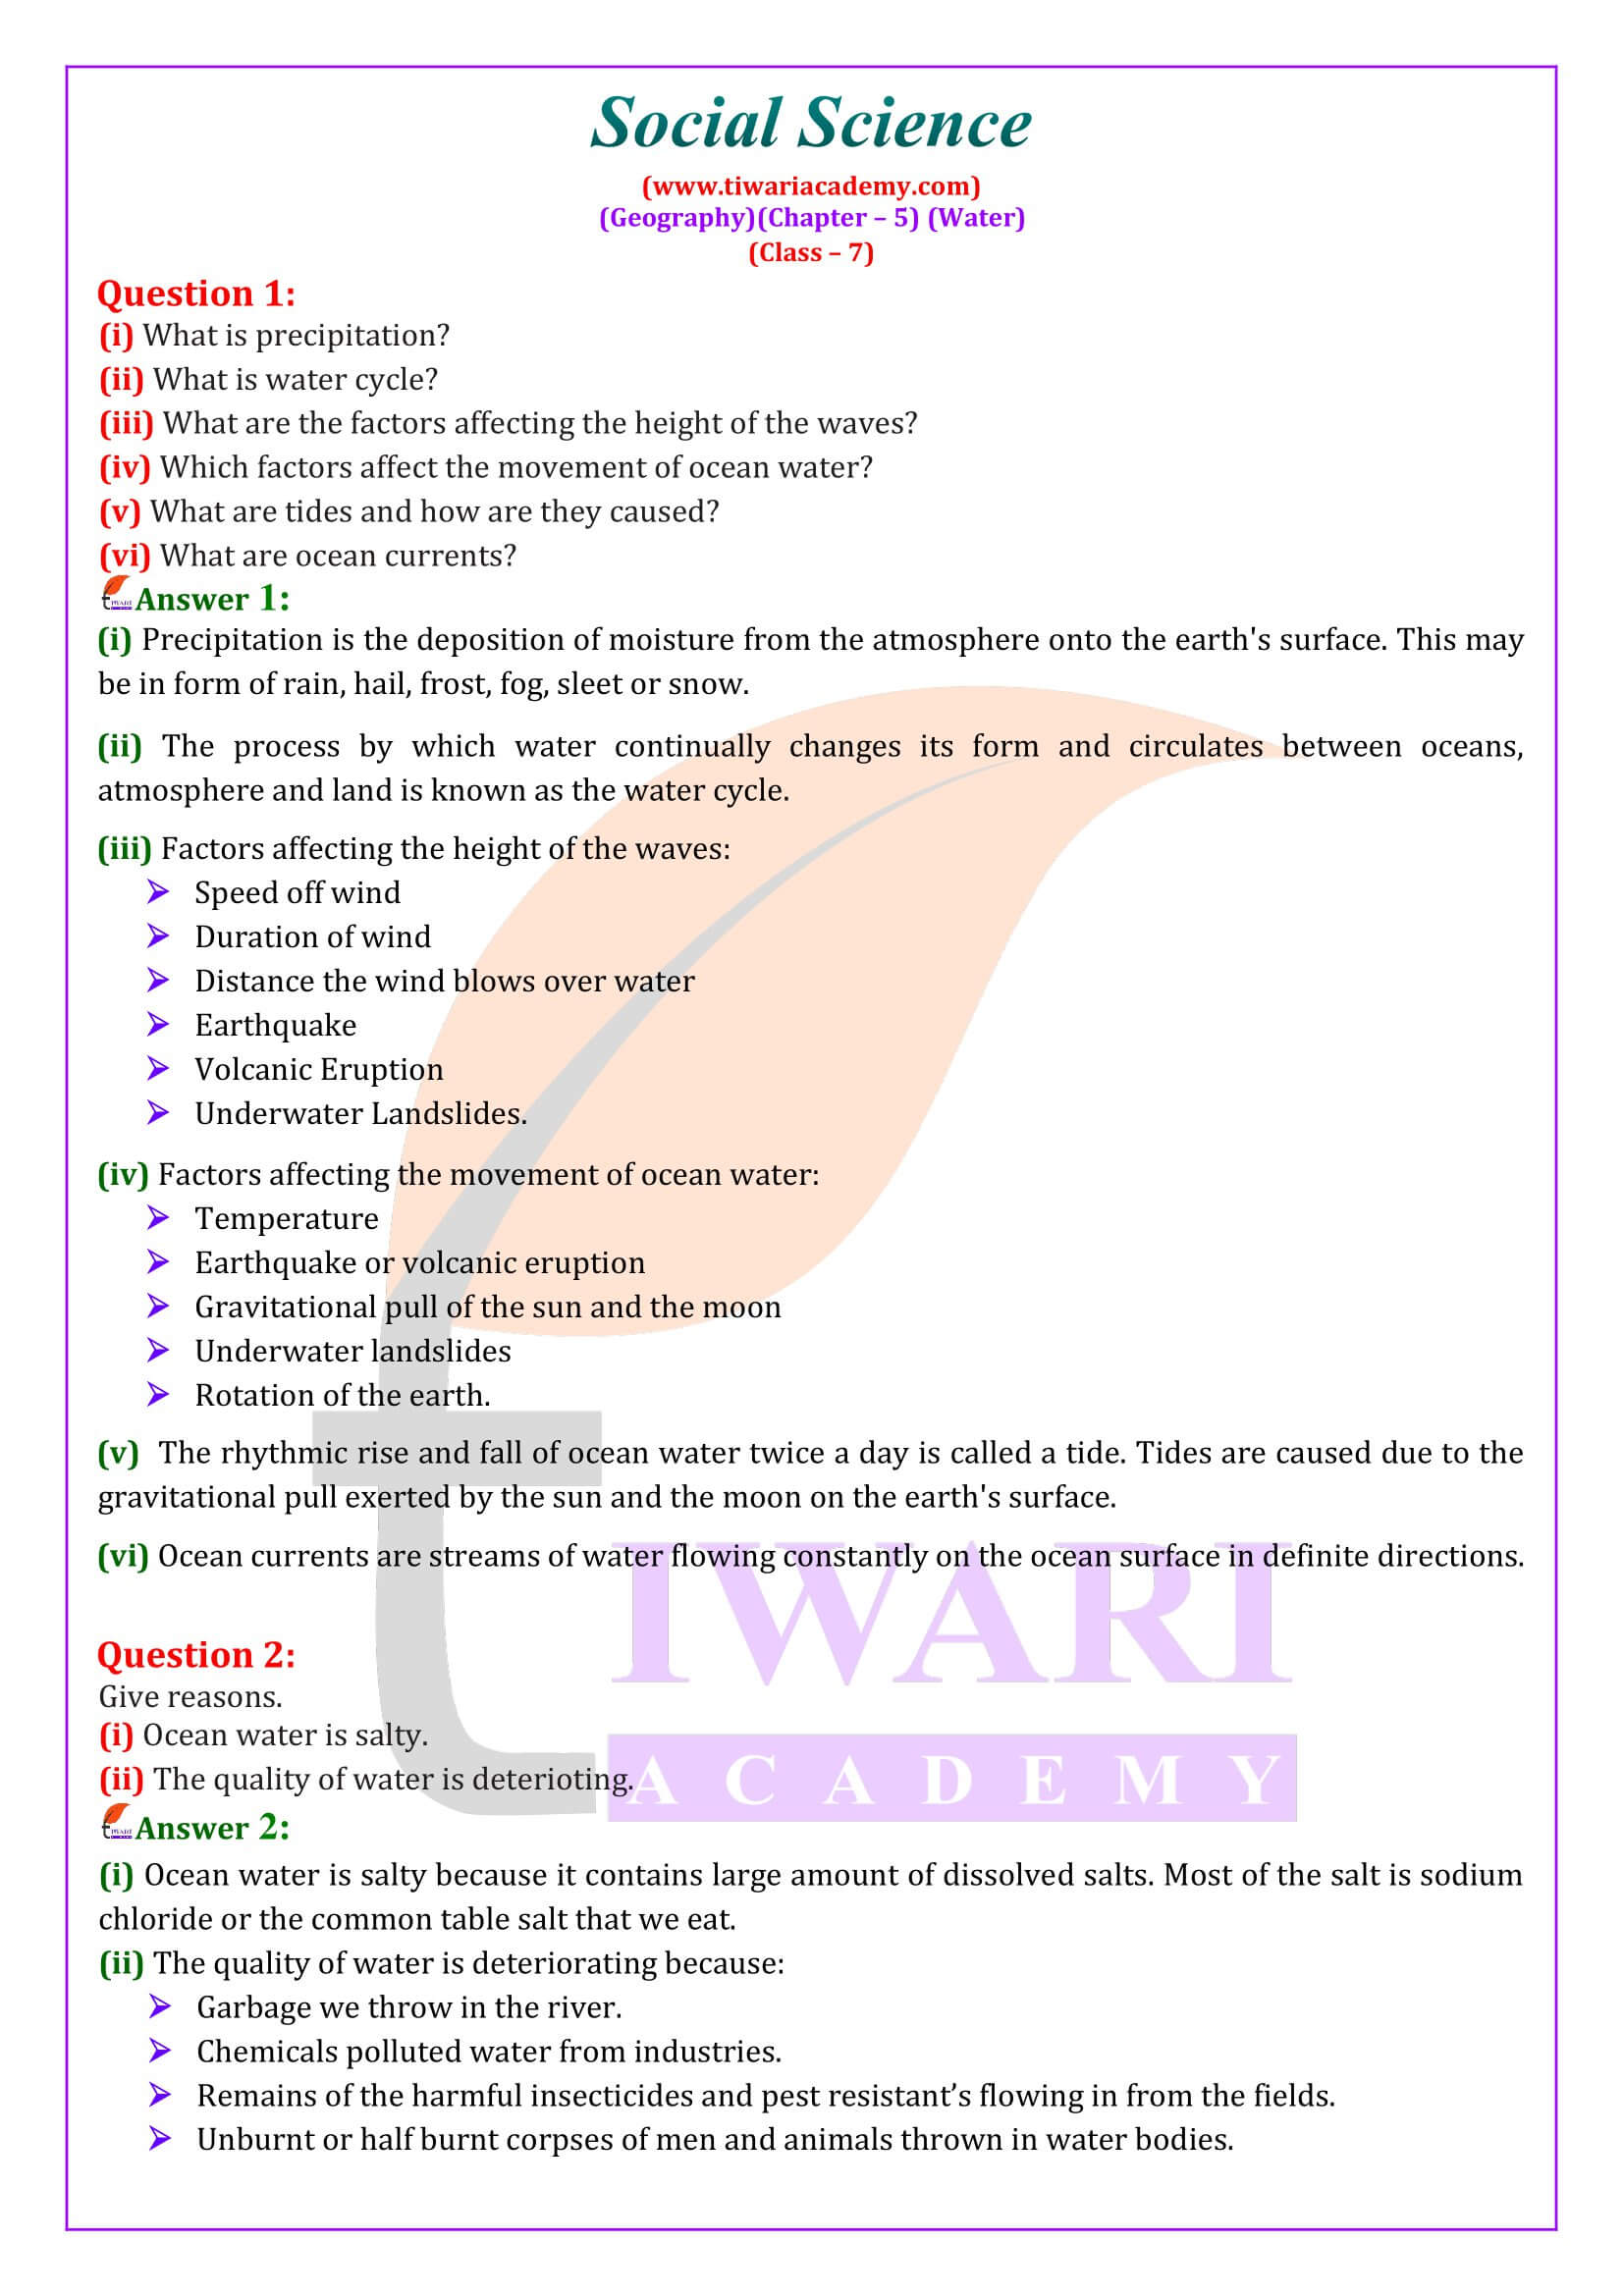 NCERT Solutions for Class 7 Social Science Geography Chapter 5